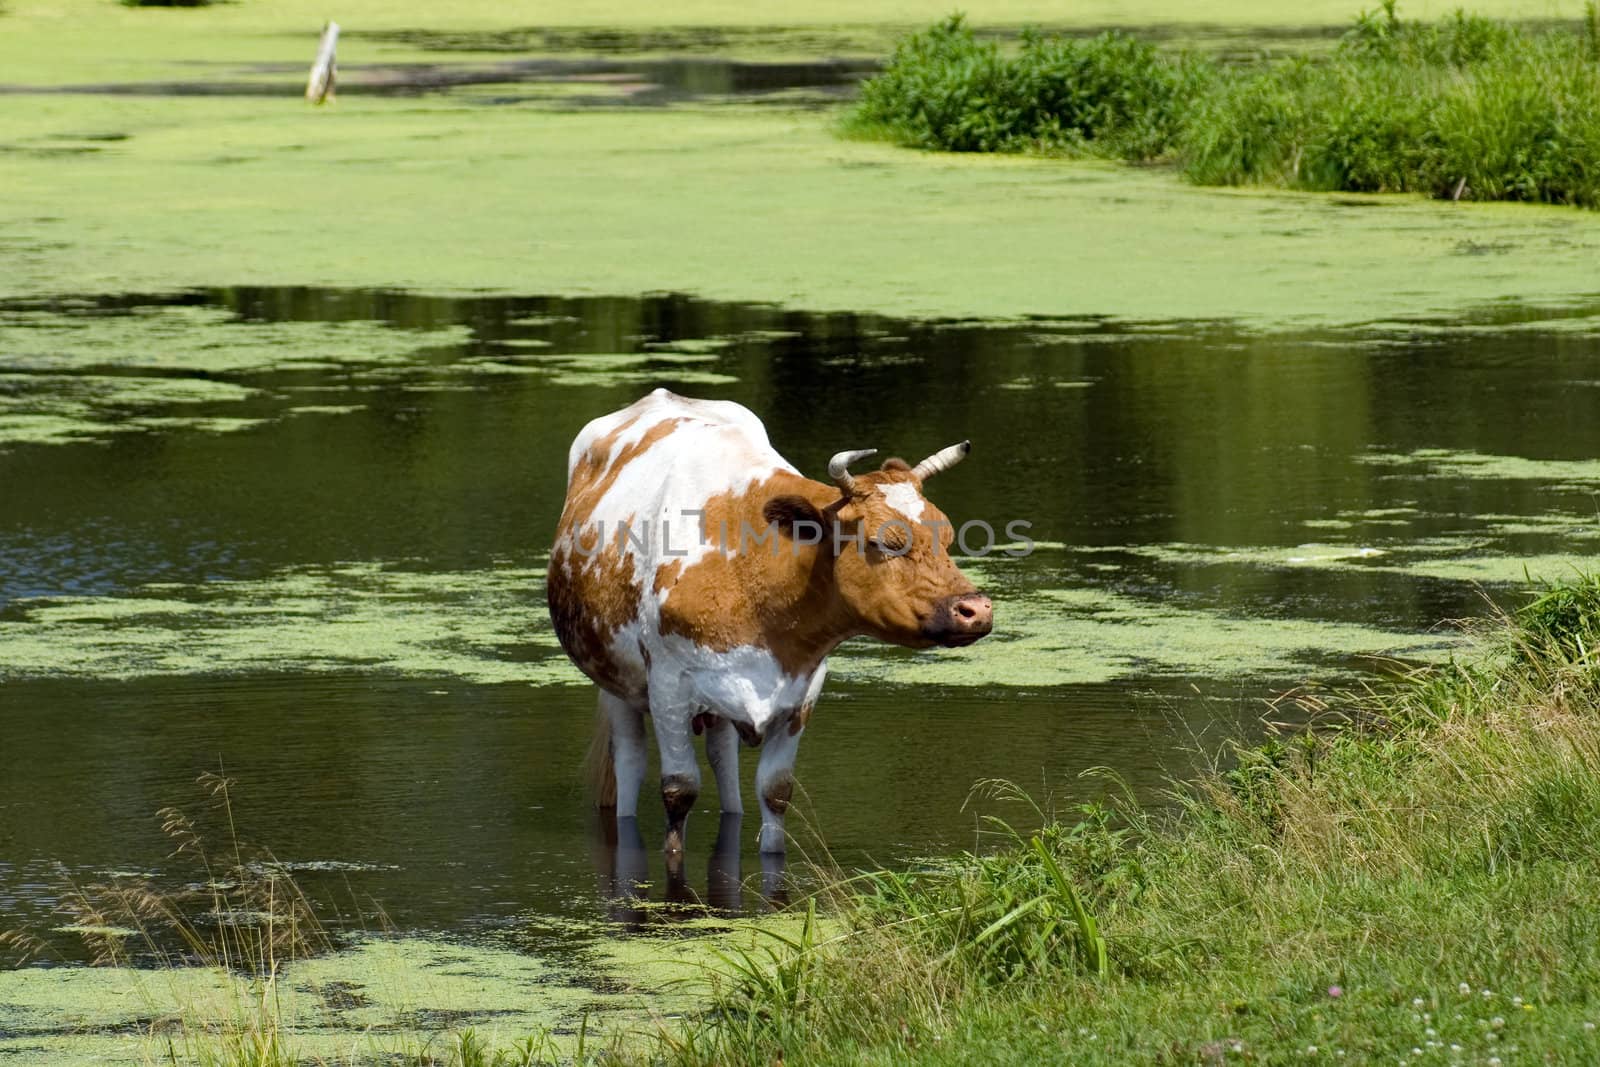 Cow saved from heat in a pond